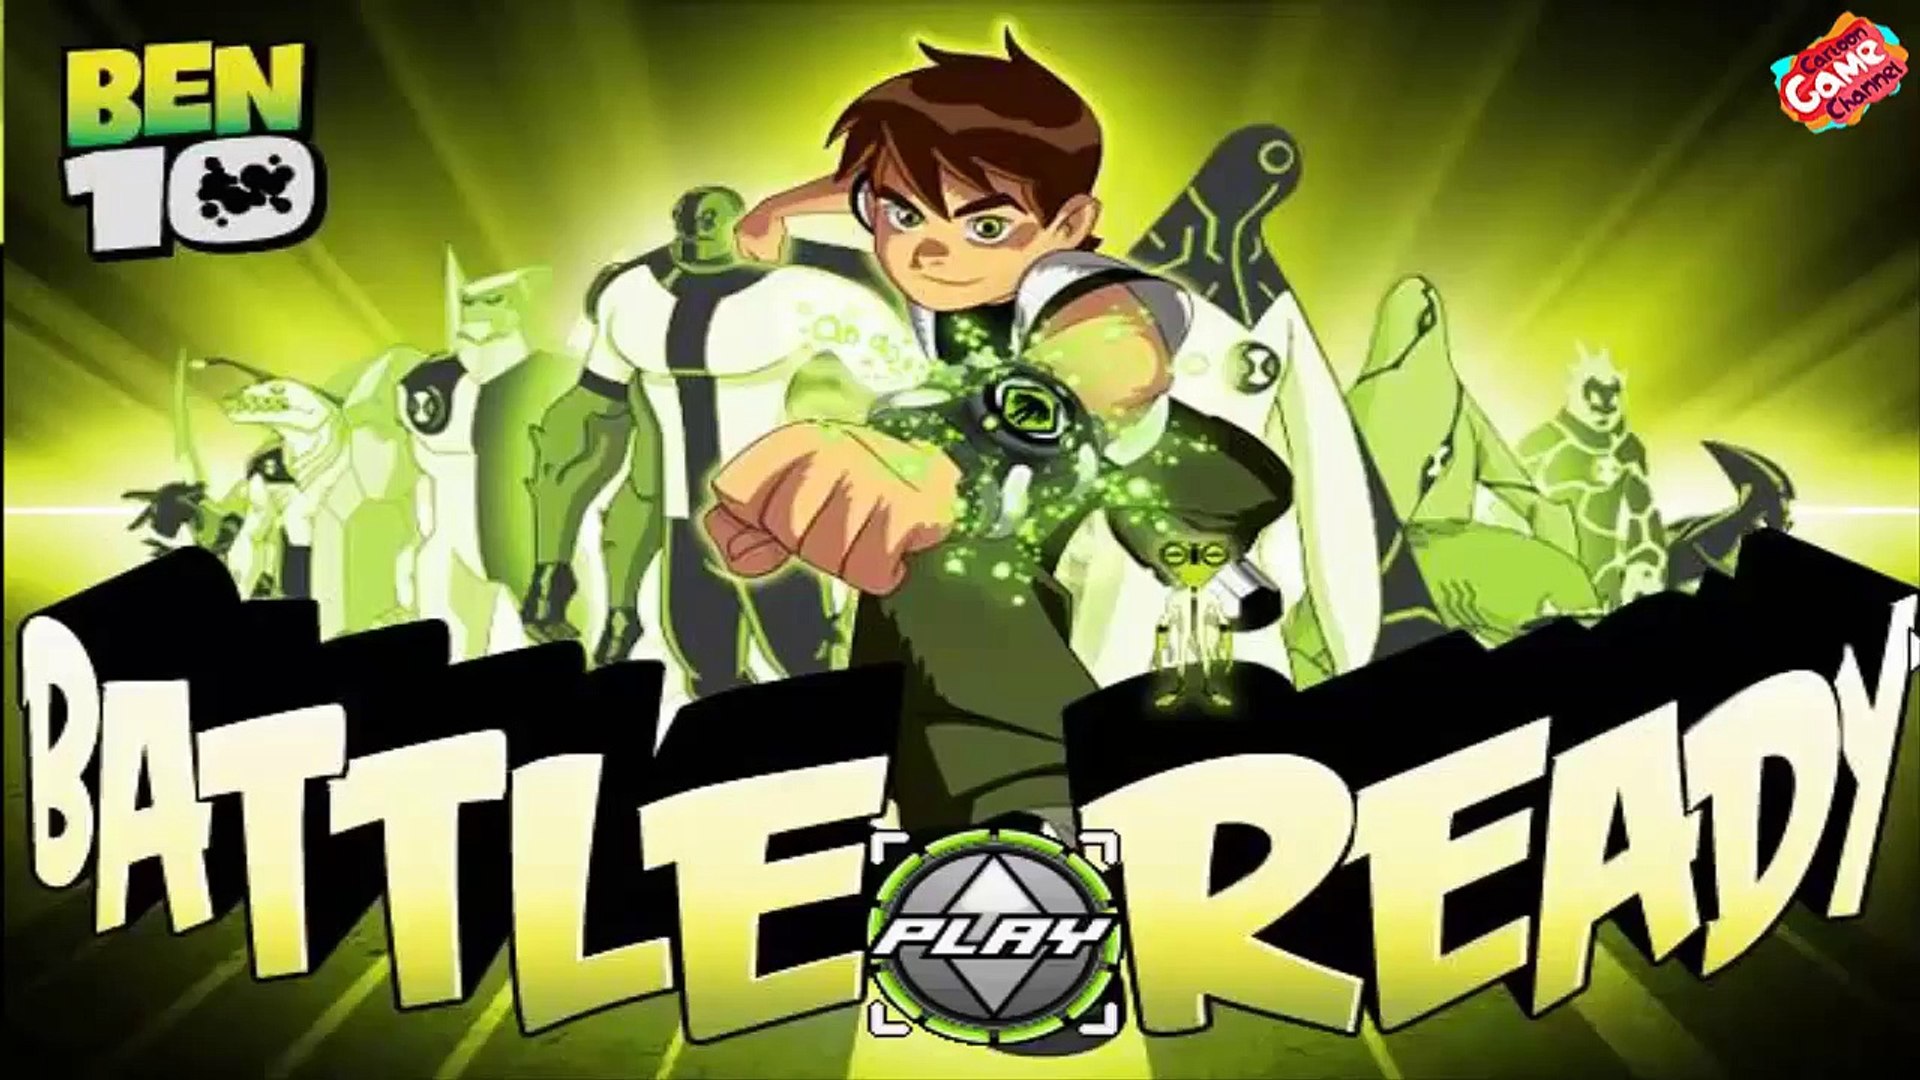 Ben 10 Games Battle Ready Full Game Play Game For Kids 2014 Dailymotion Video